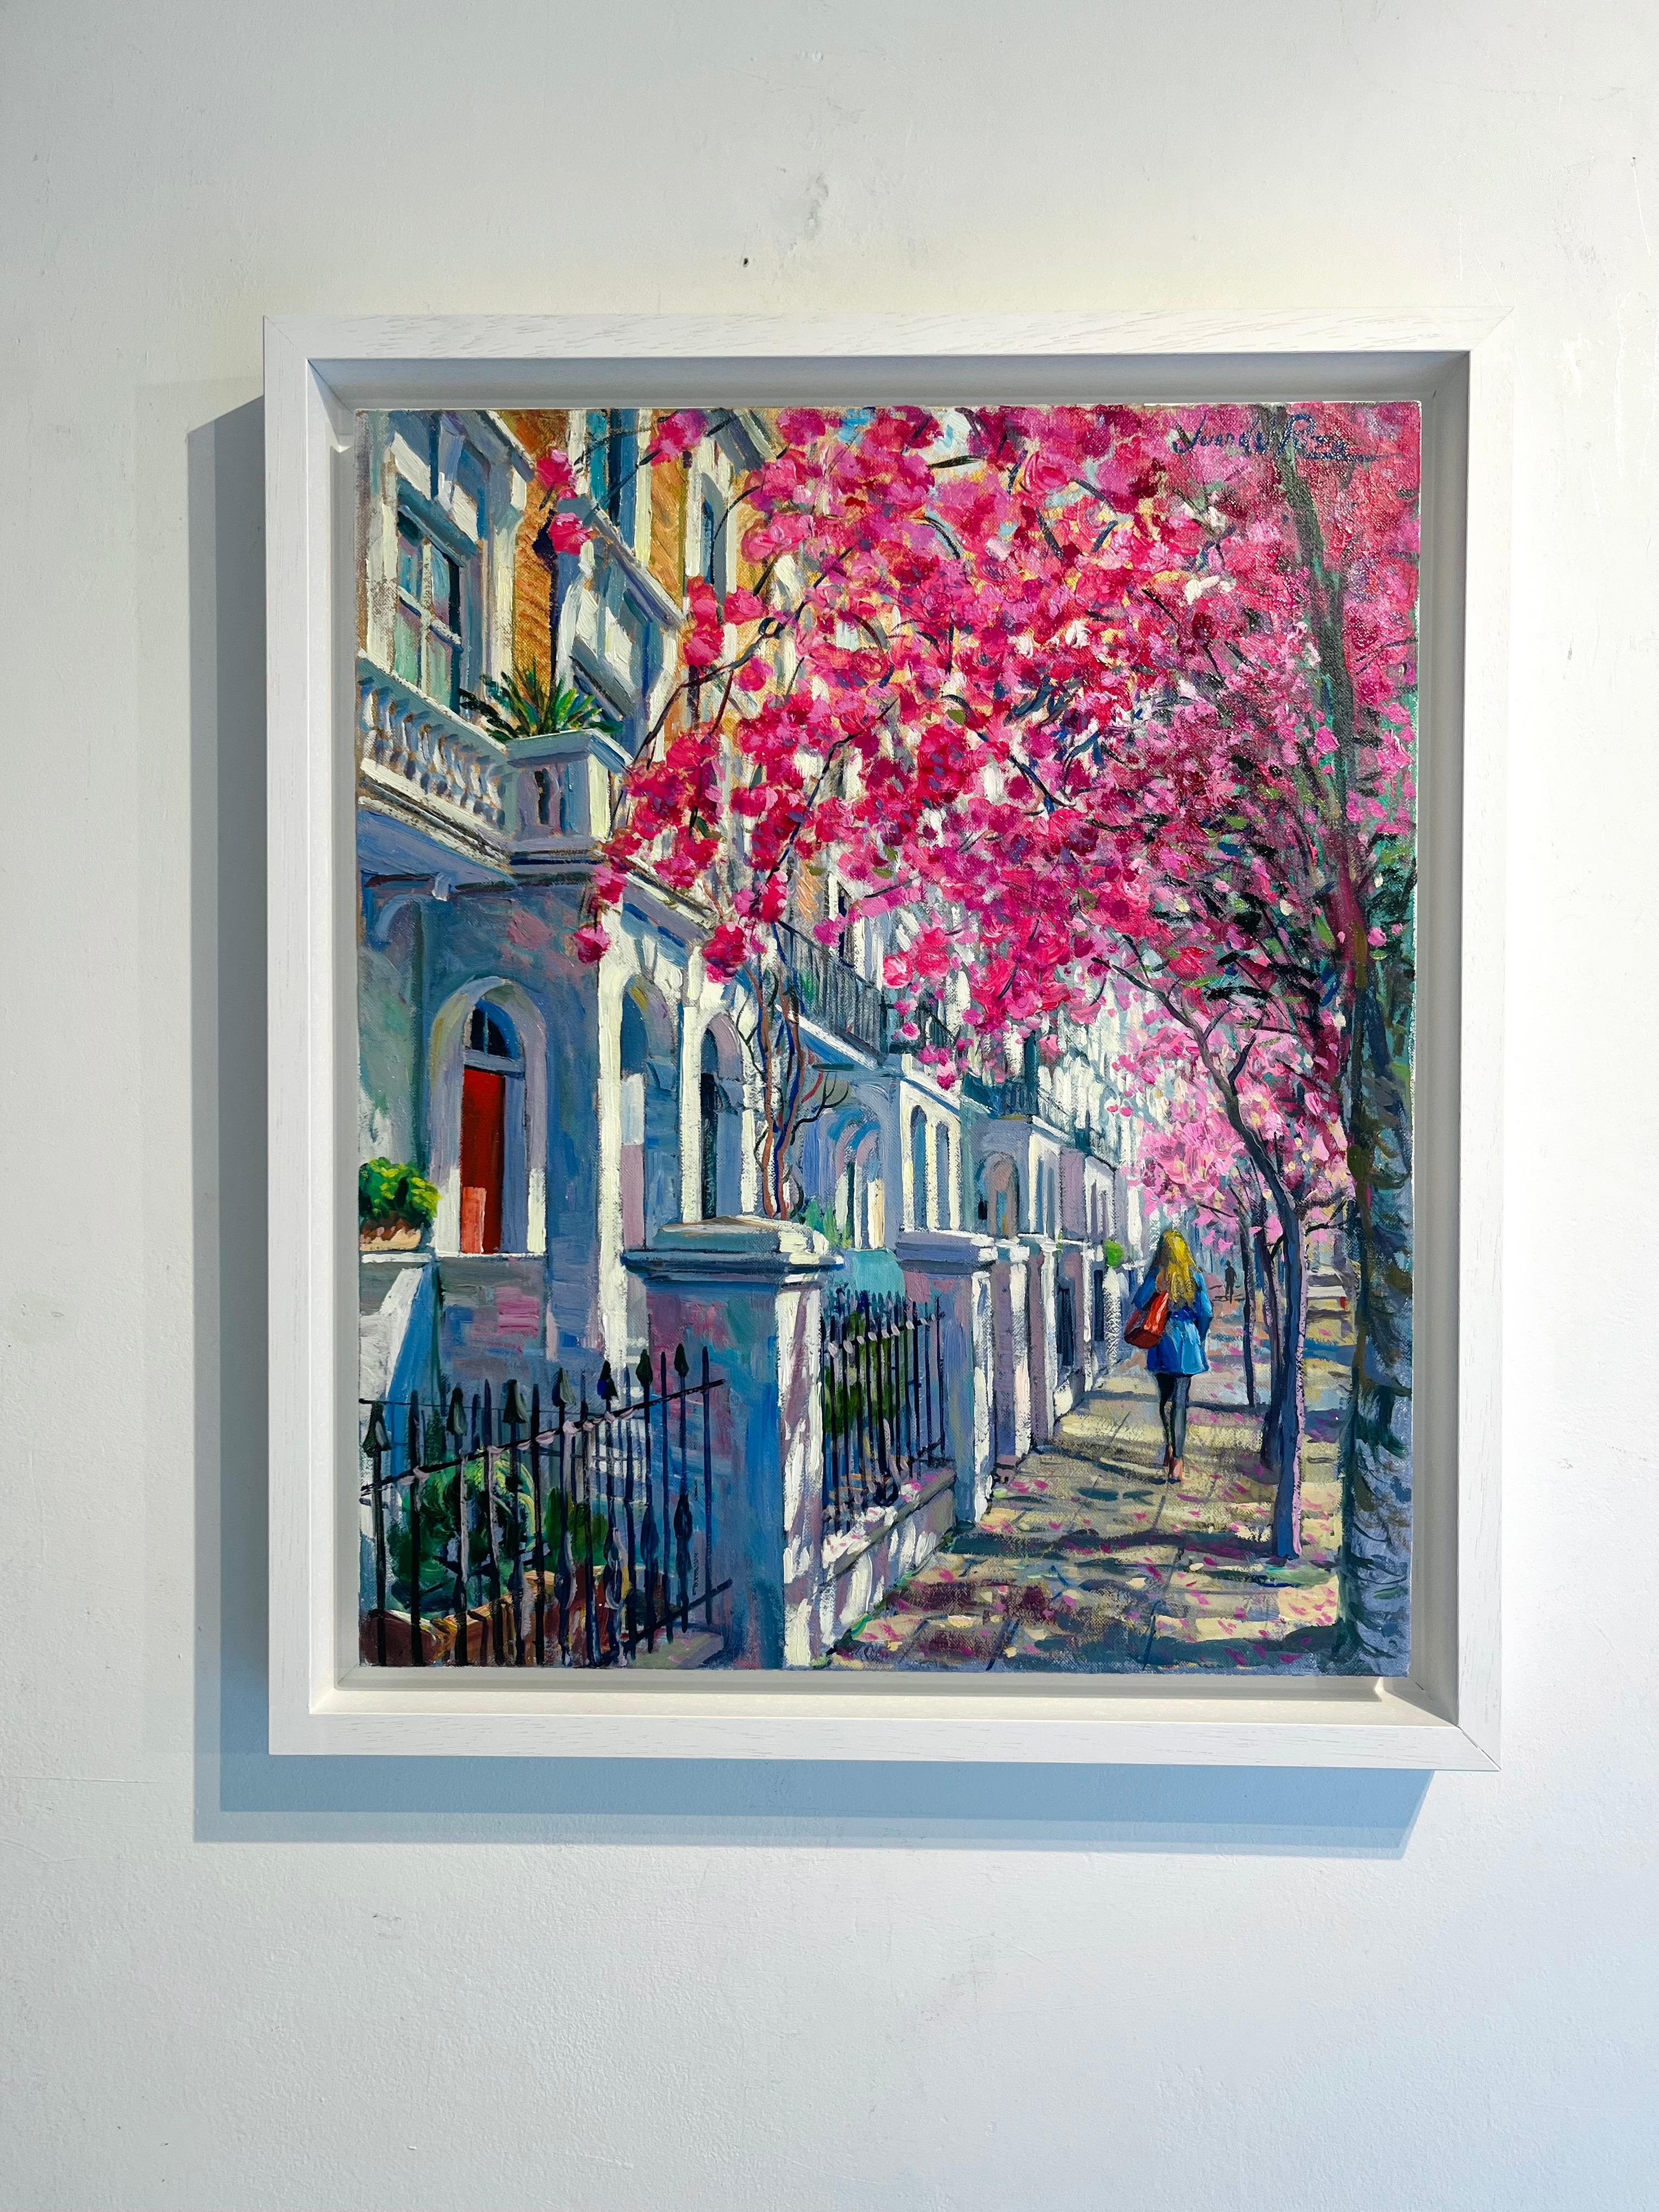 Walking Under Blossom-original impressionism cityscape blossoms oil painting-art - Painting by Juan del Pozo